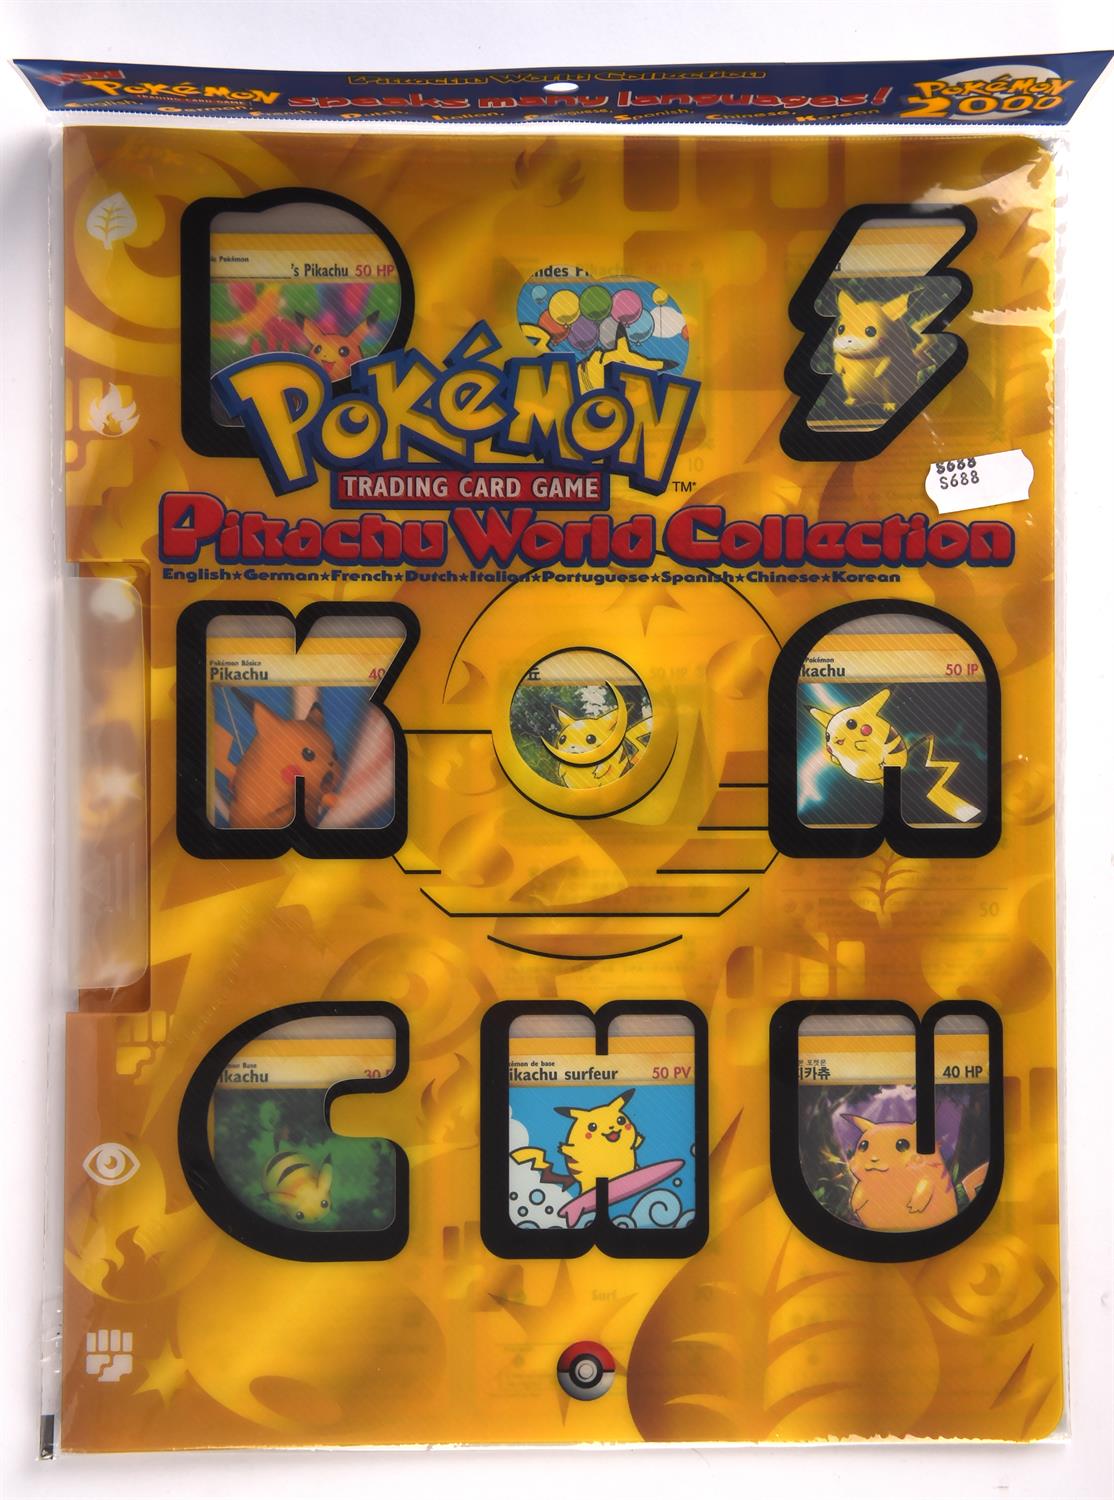 Pokemon TCG. One Sealed Pikachu World Collection Binder and one Neo 2 Japanese Premium Binder which - Image 2 of 2